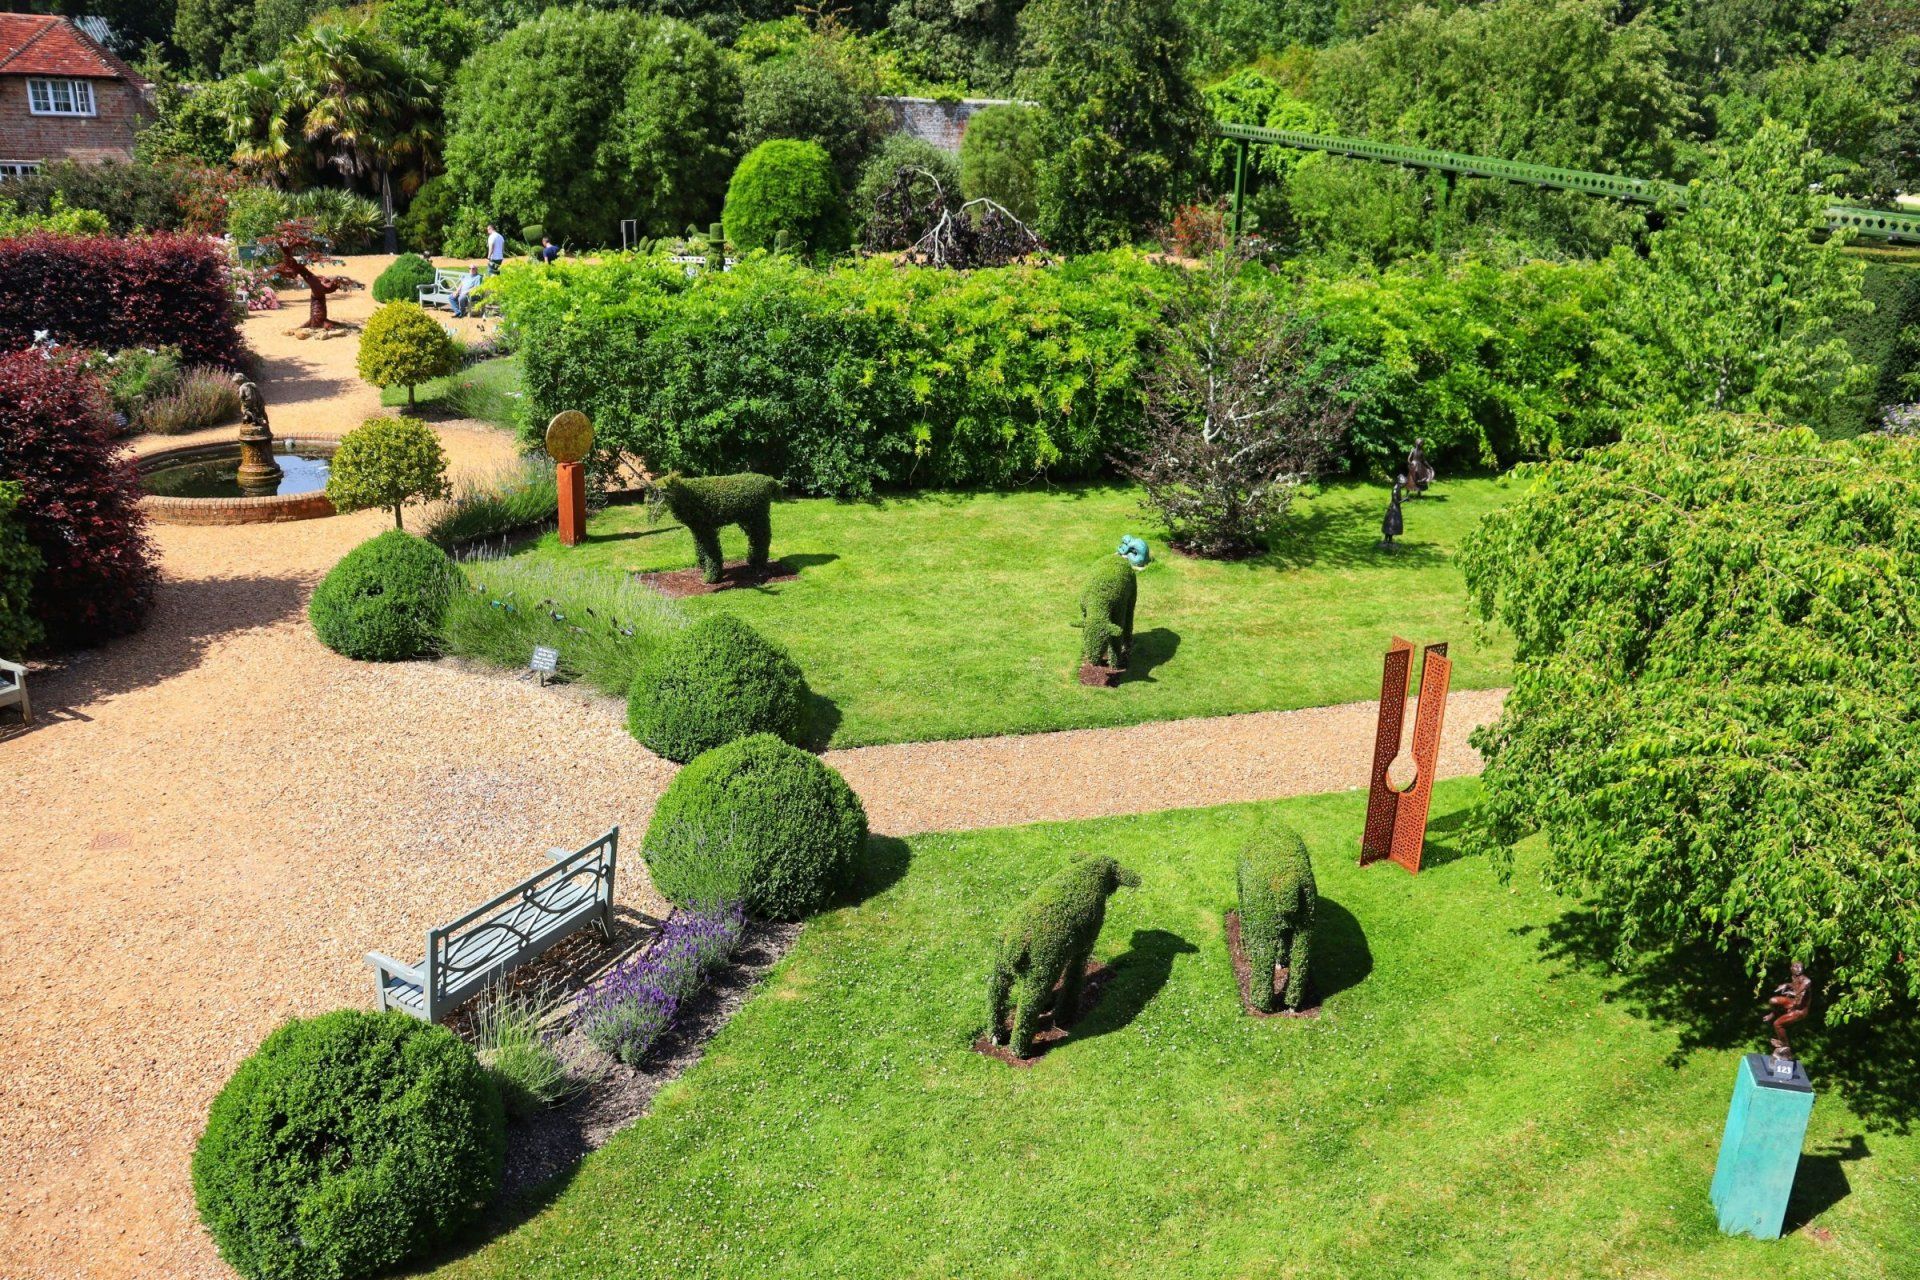 an aerial view of a garden with a bench and sculptures